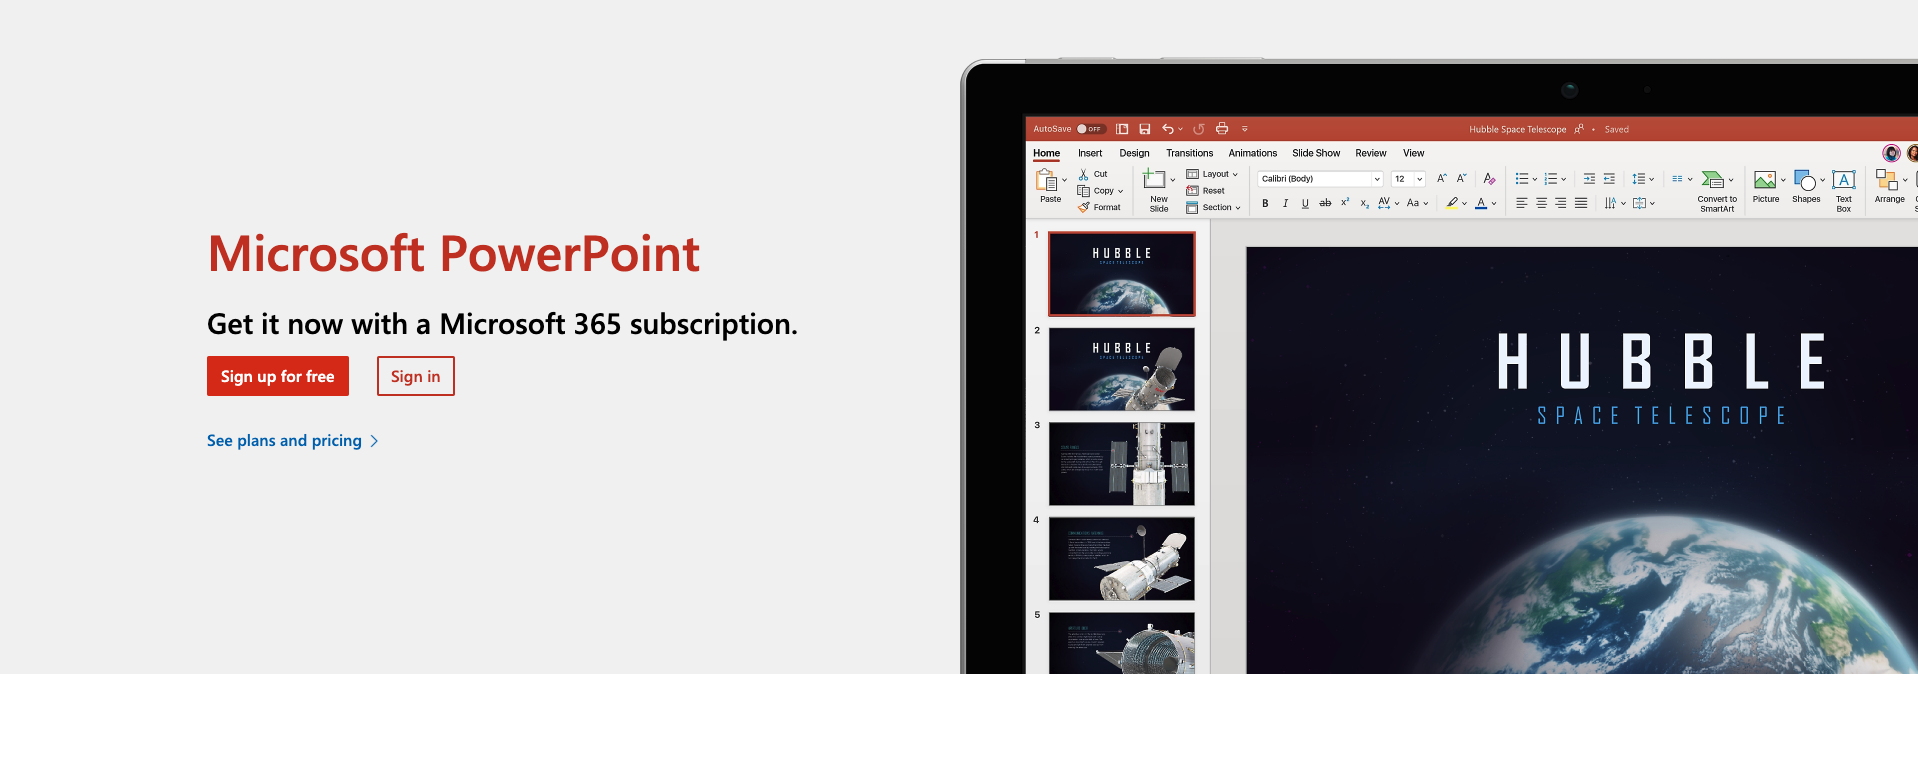 Microsoft Powerpoint Landing Page